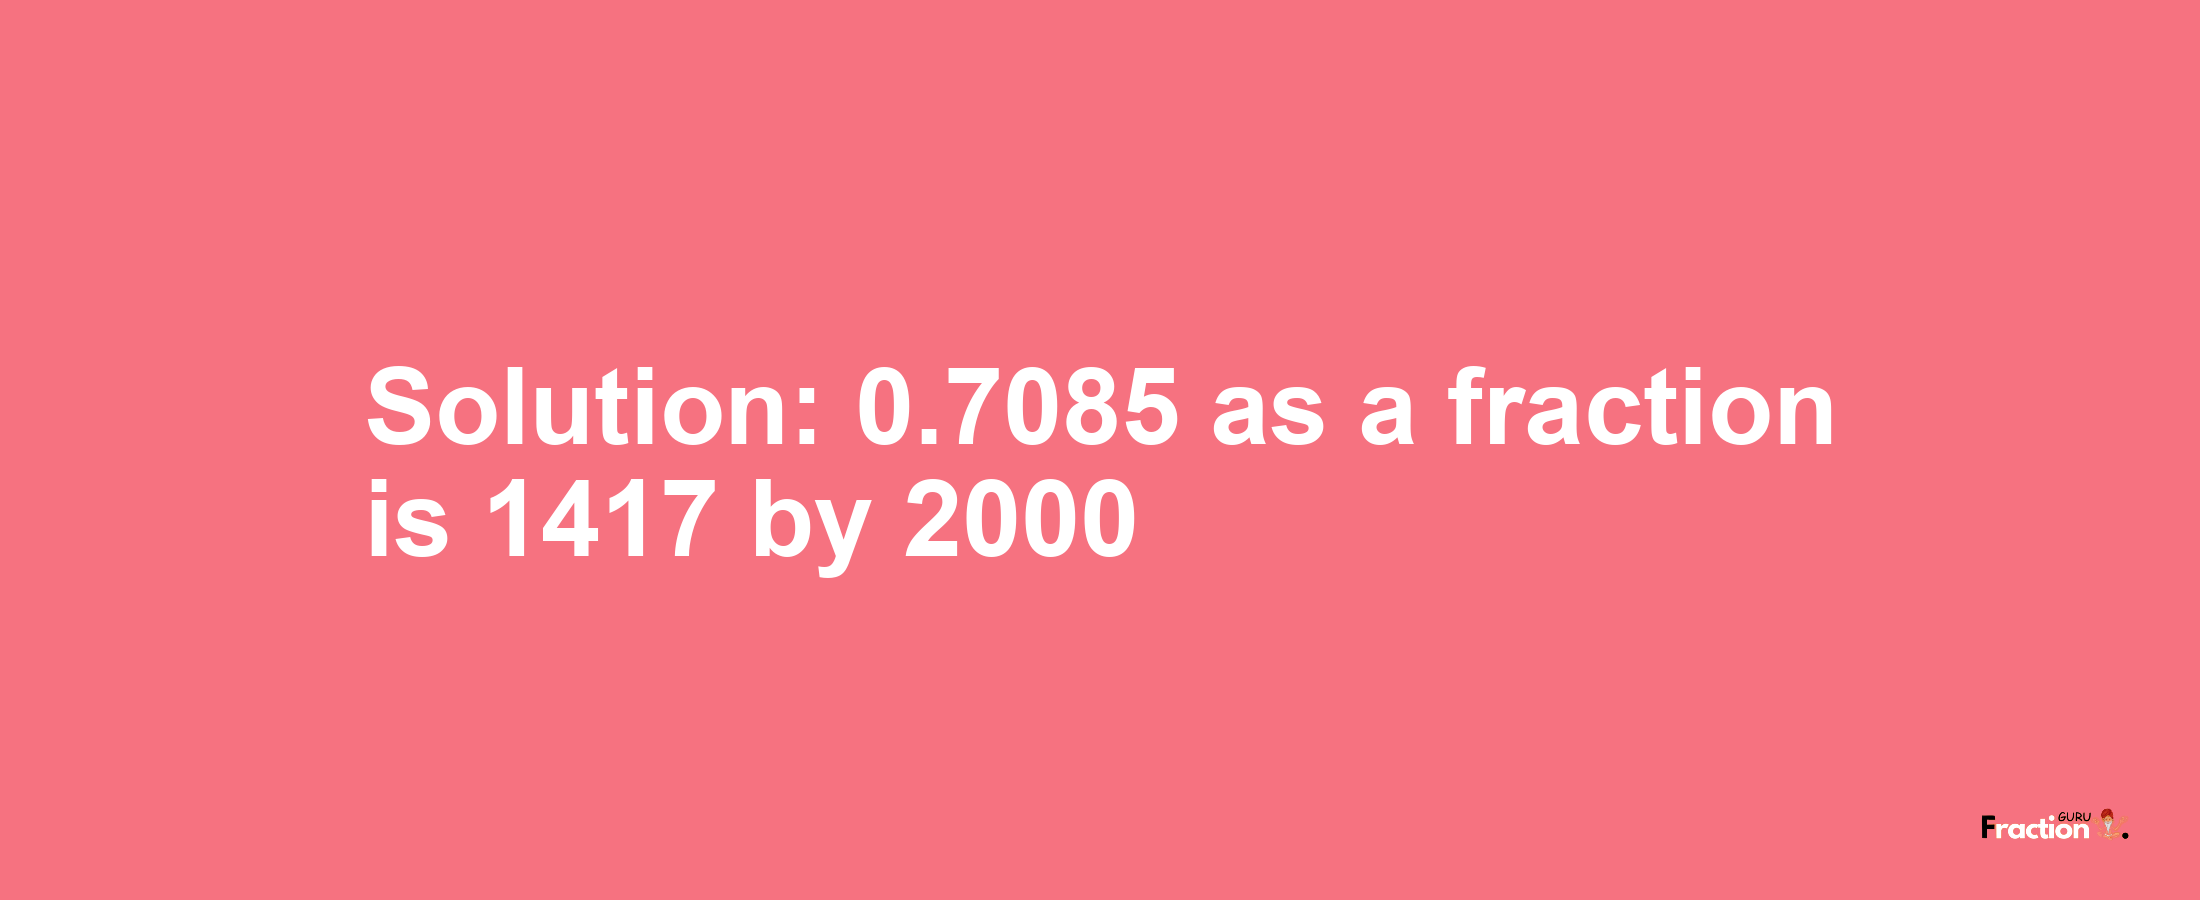 Solution:0.7085 as a fraction is 1417/2000